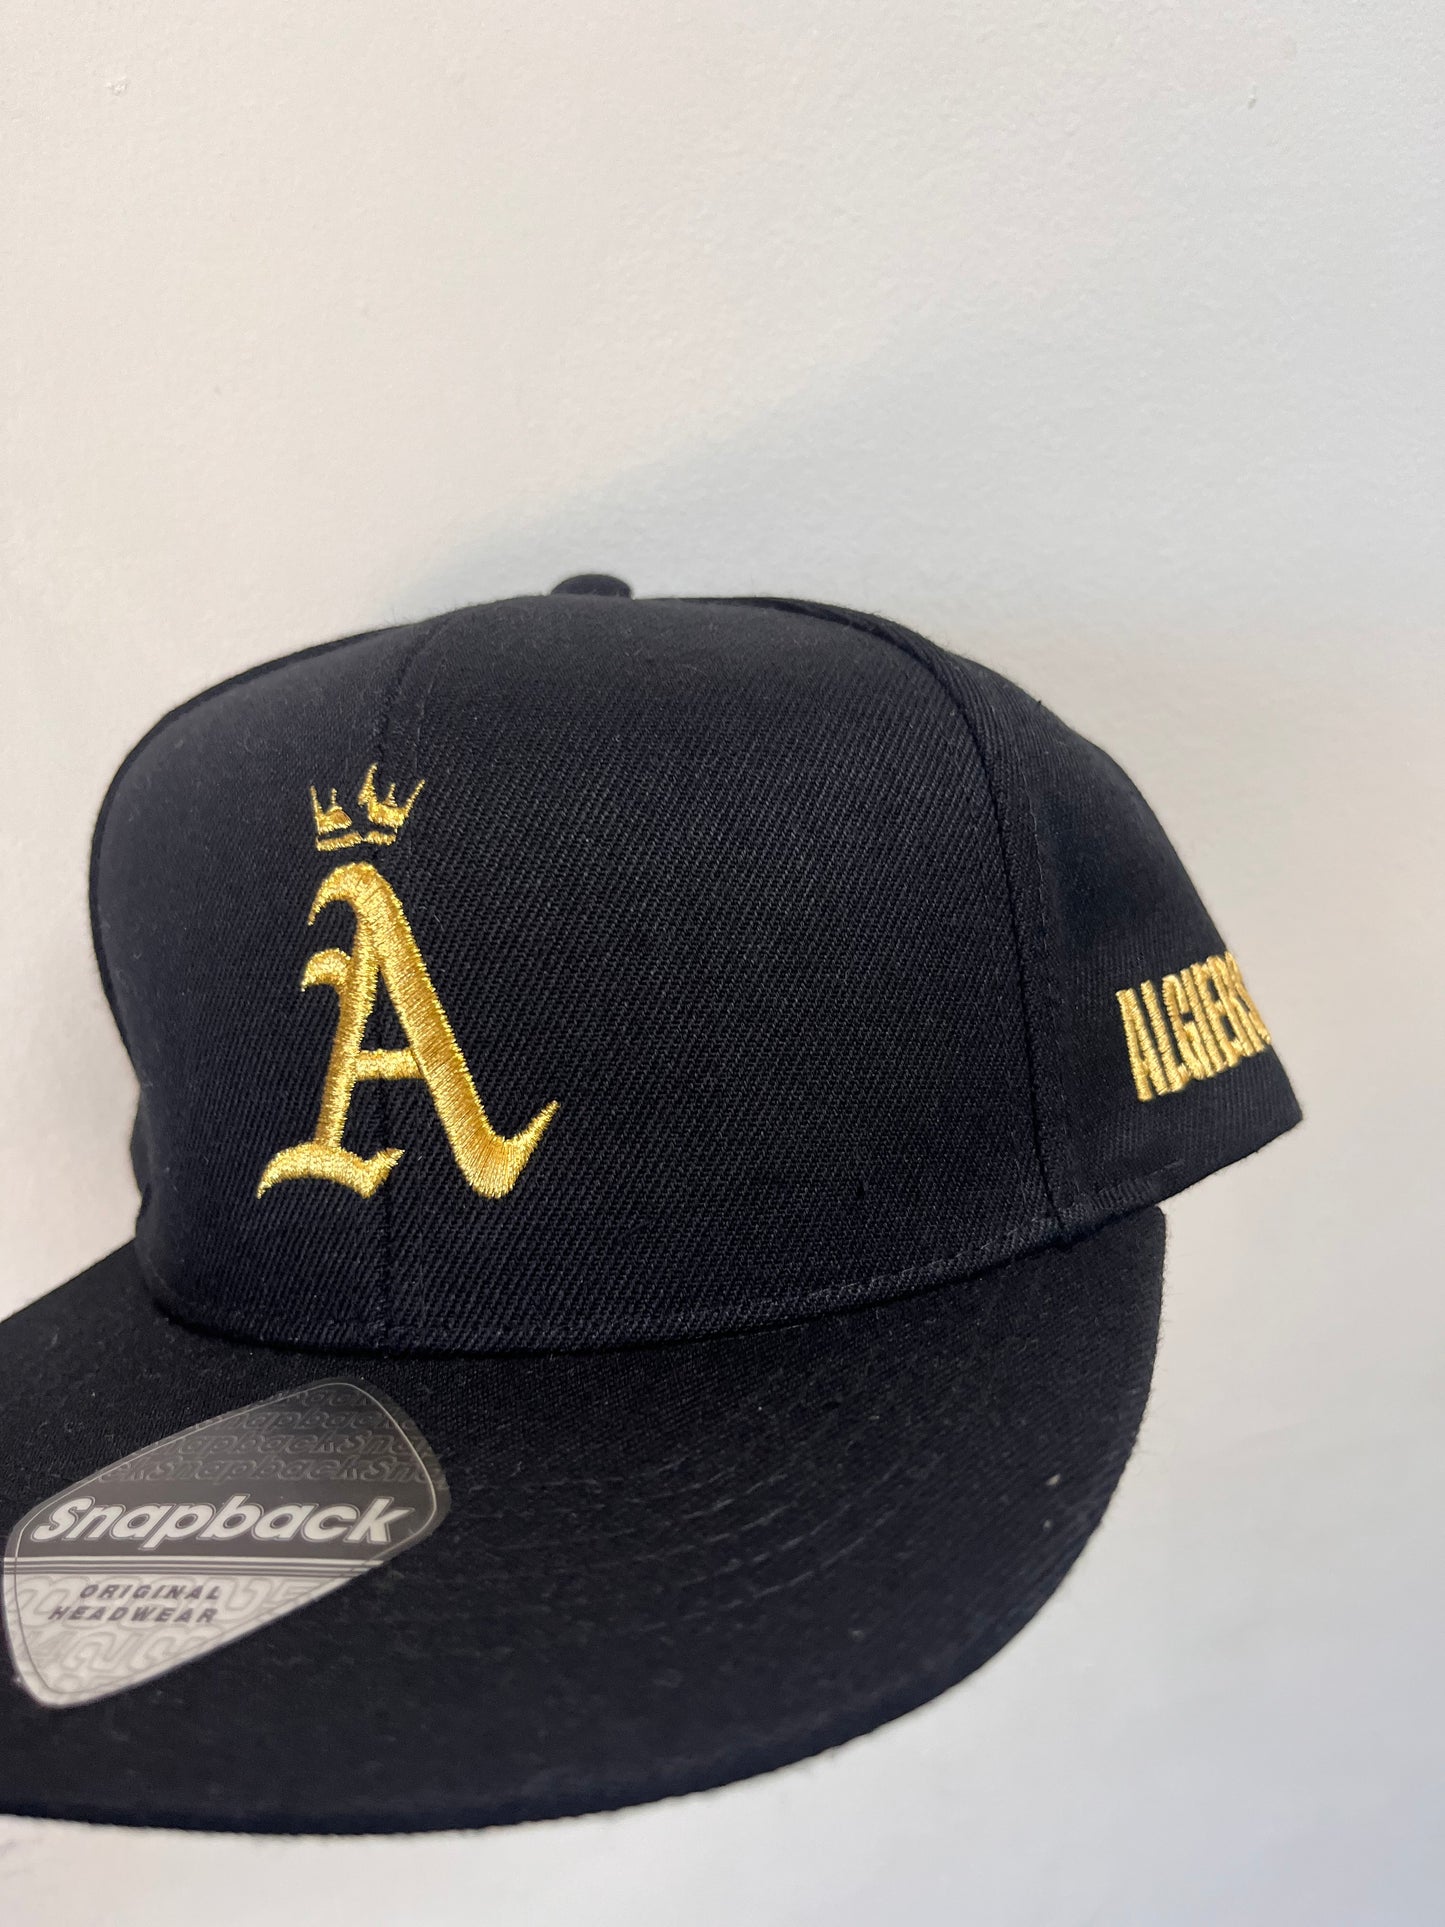 Welcome to the “A” Crown Hat